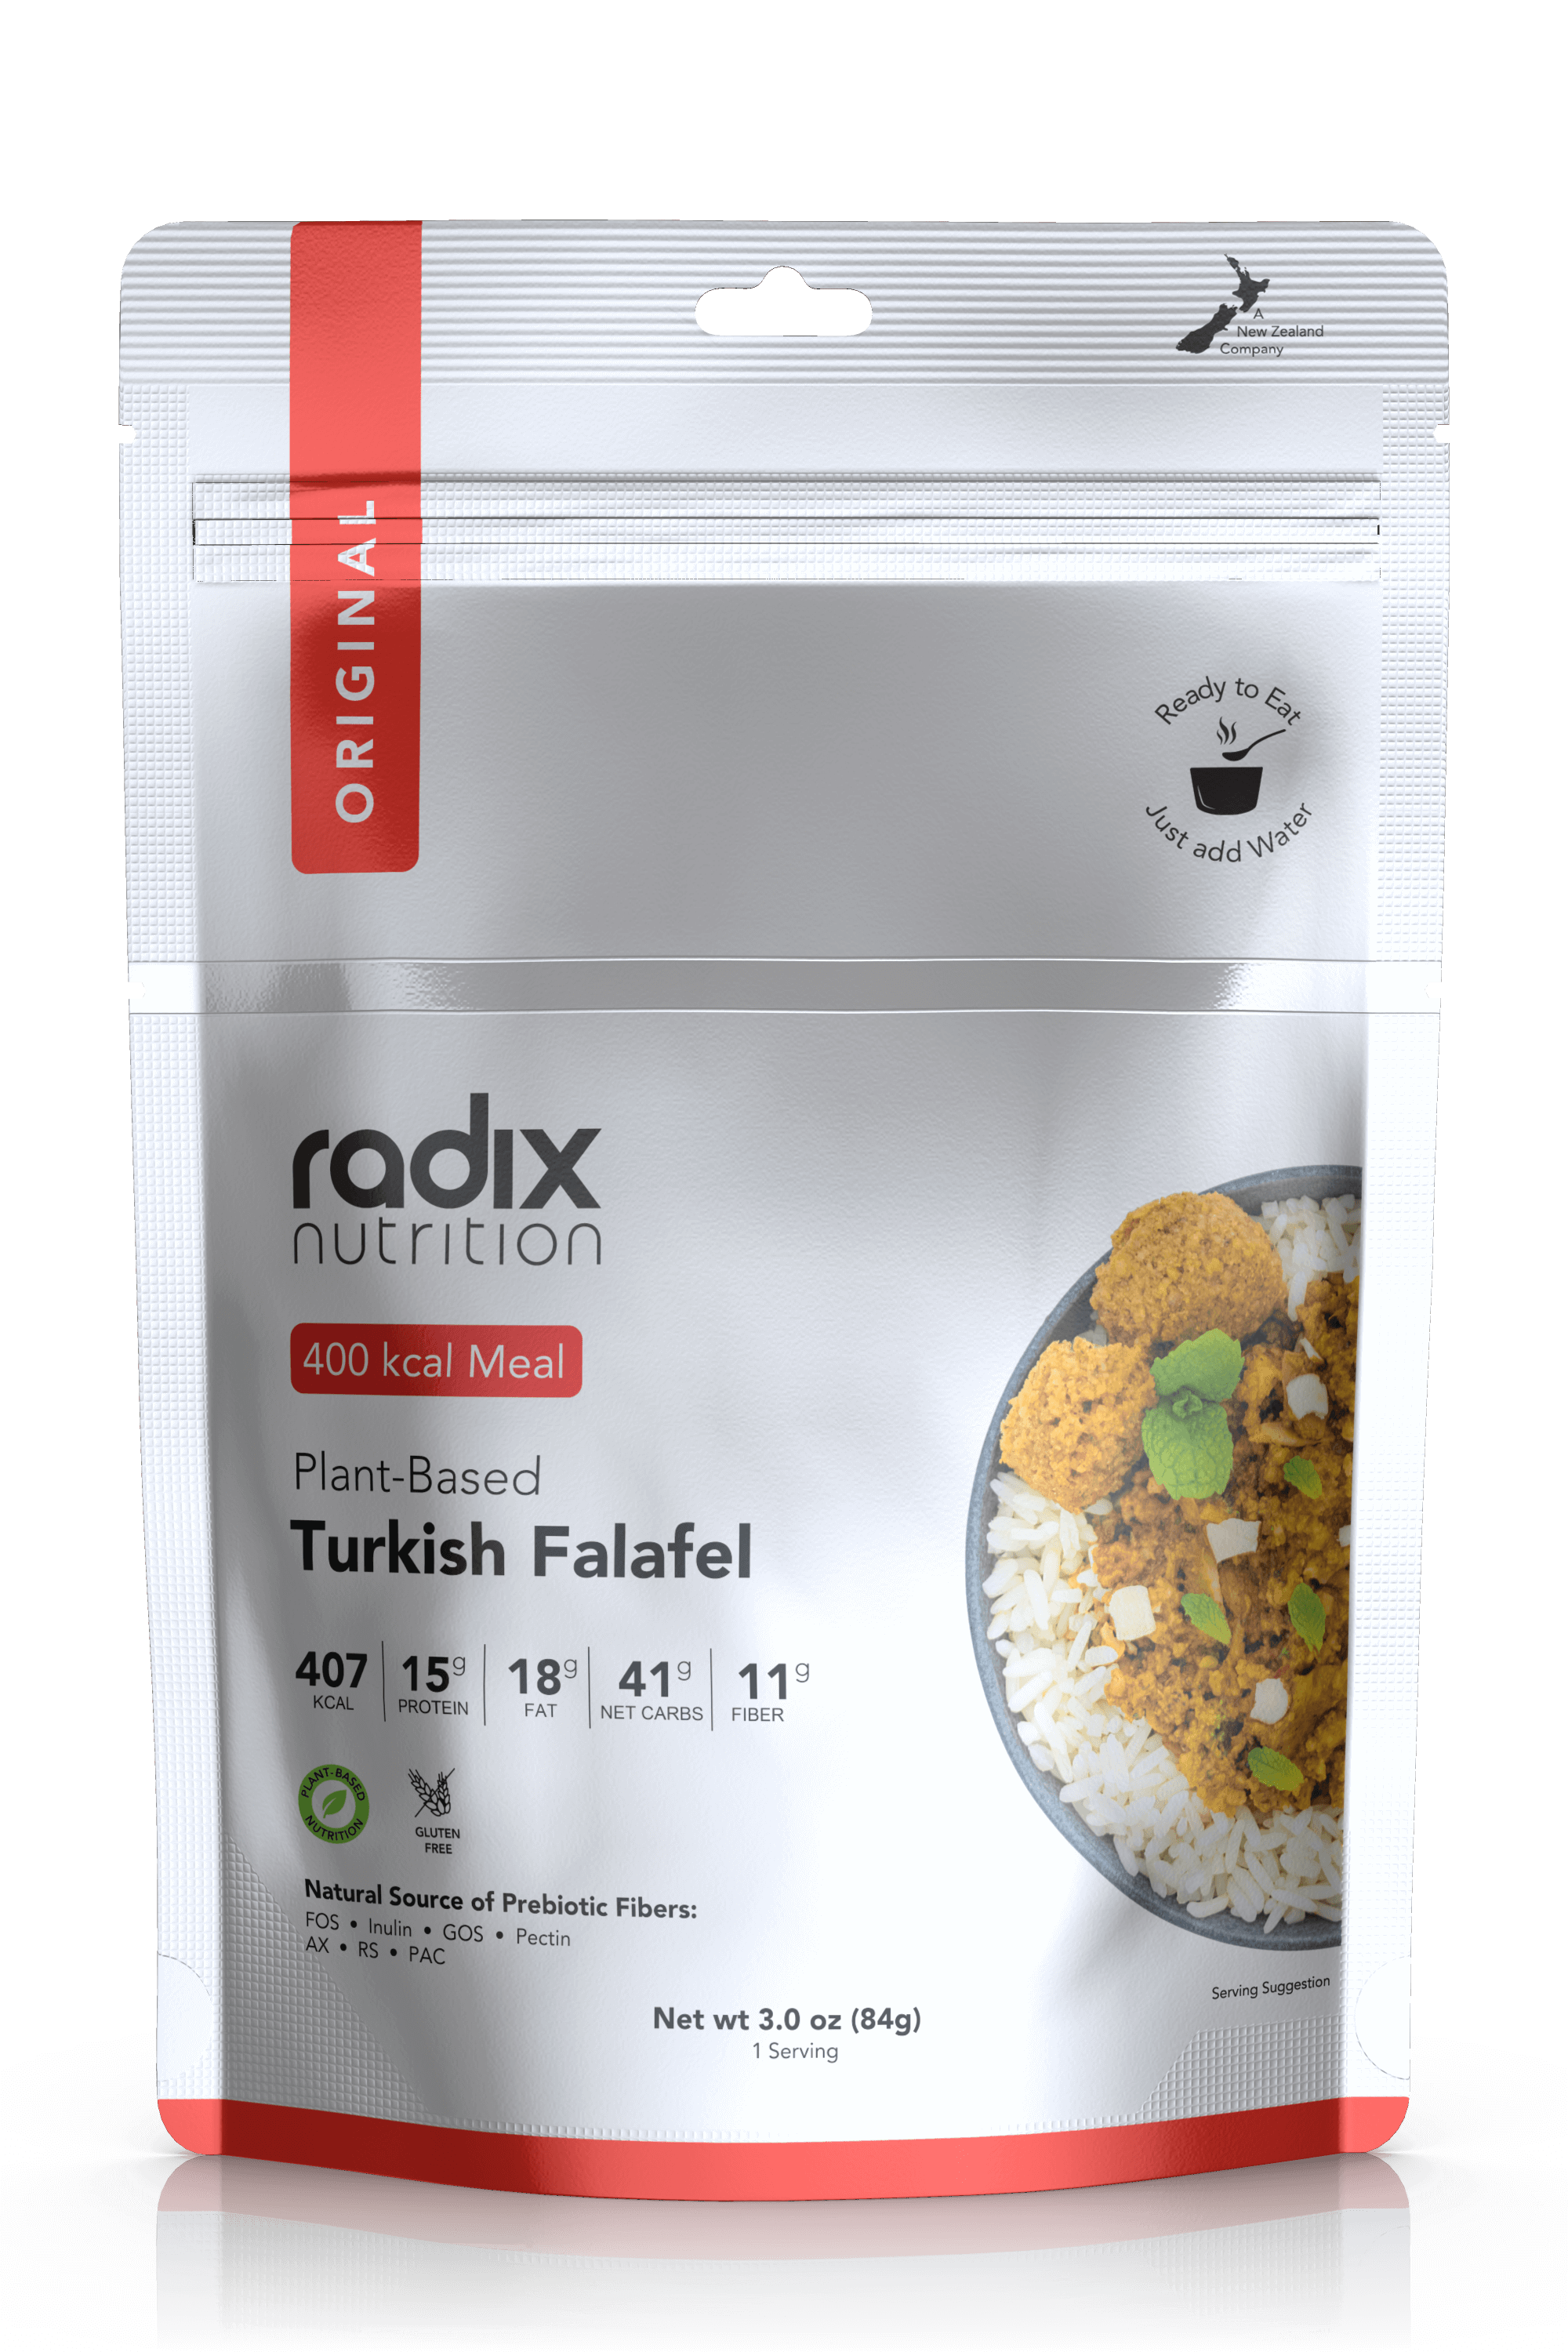 Radix Nutrition Original 400 Plant-Based Turkish Falafel V7 - Tramping Food and Accessories sold by Venture Outdoors NZ